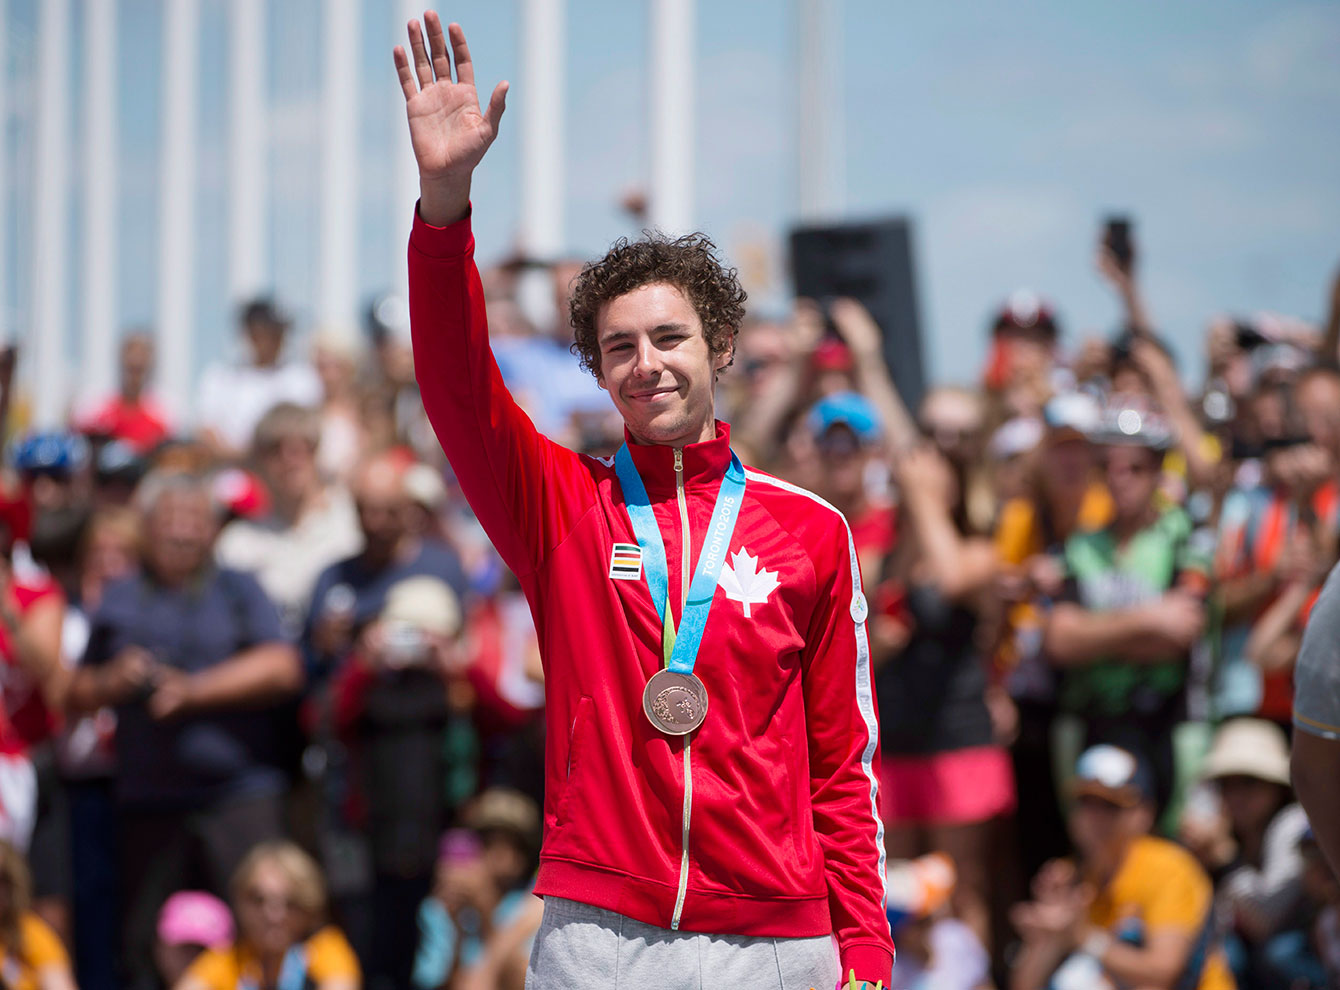 Sean MacKinnon waves during the medal ceremony for the men's individual time trial at TO2015.